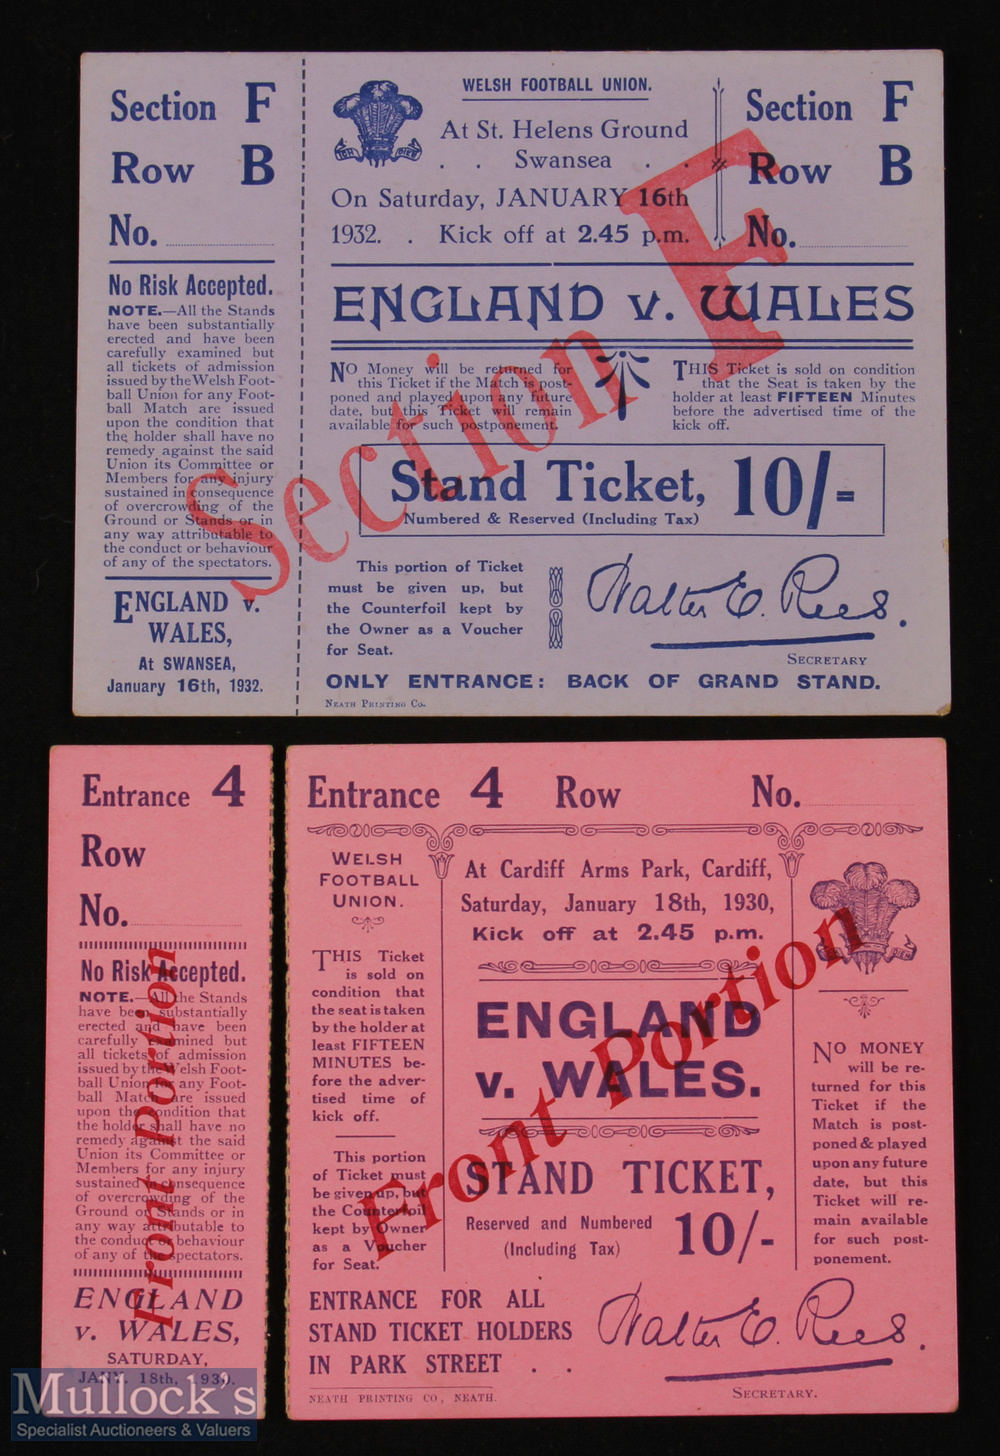 1930 & 1932 Wales v England Rugby Tickets (2): Pink and lilac respectively, crisp, neat & clean